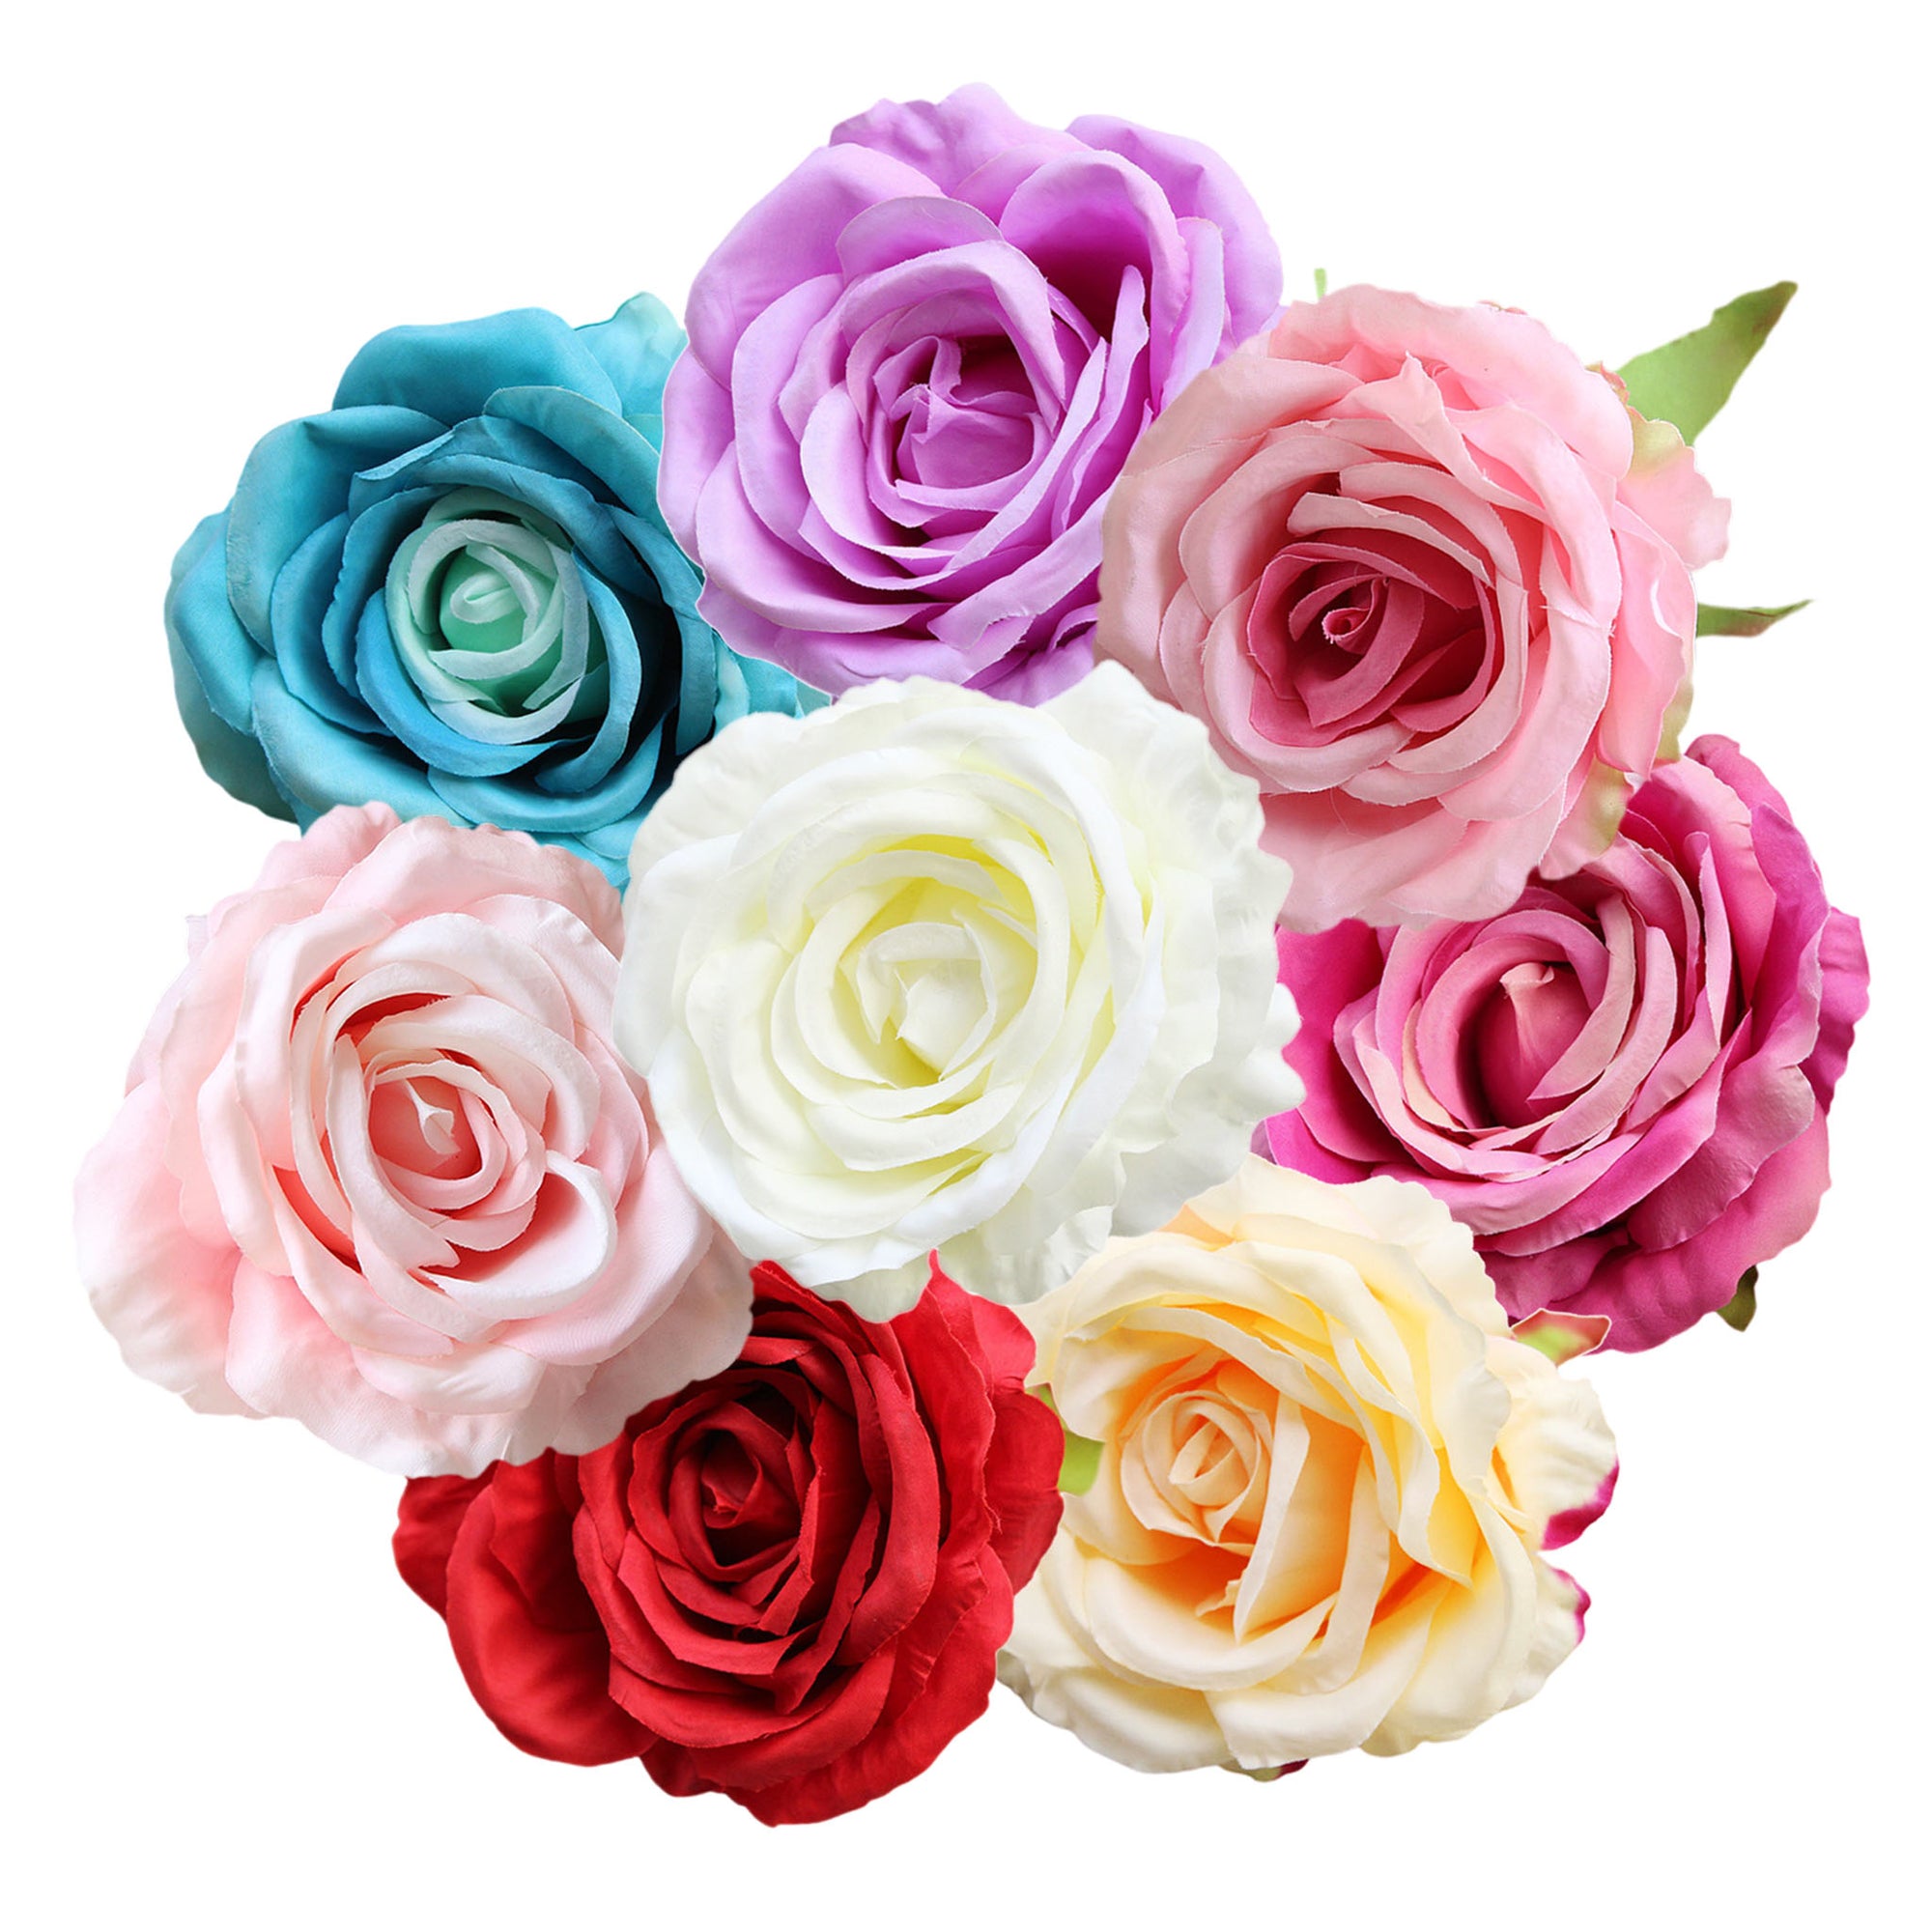 Wholesale Large Roses Silk Flowers 4-5 inch